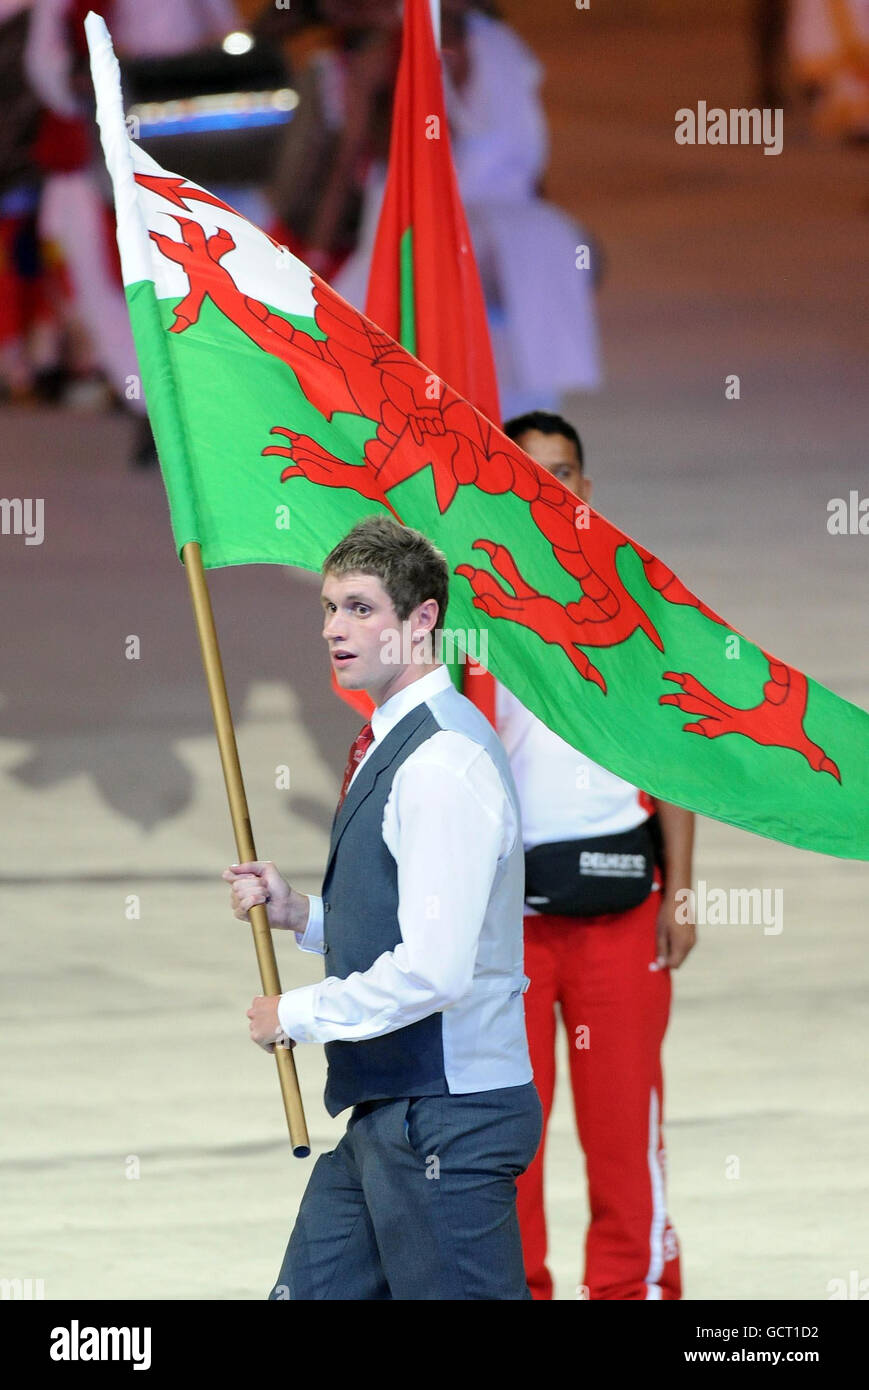 Wales' David Davies carries their flag during the 2010 Commonwealth Games opening ceremony at the Jawaharlal Nehru Stadium in New Delhi, India. Stock Photo